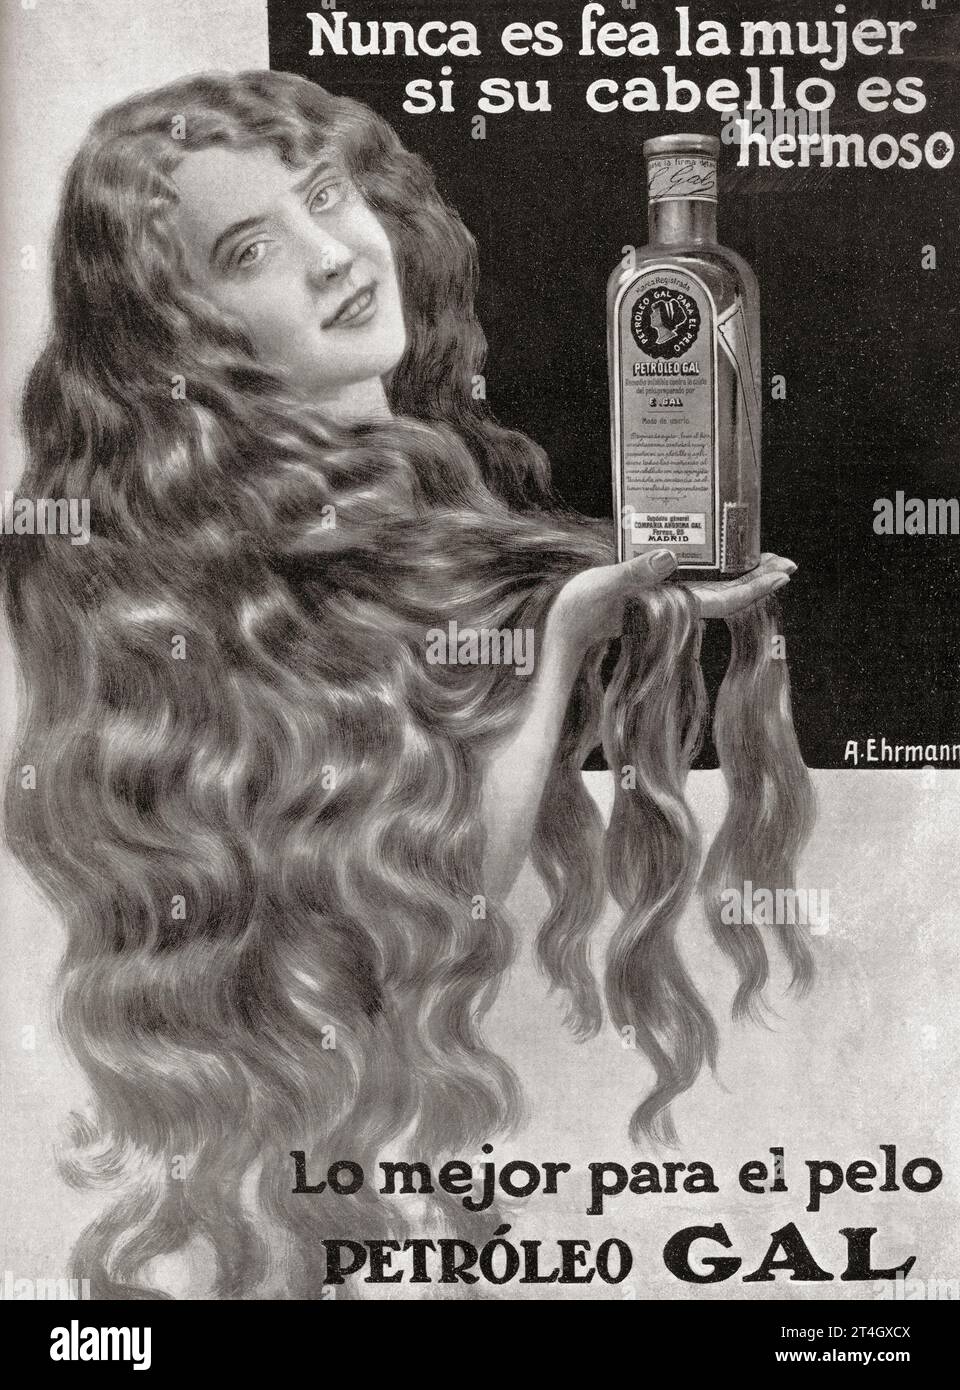 Spanish advertisement for El petróleo Gal, 1912.  El petróleo Gal  or Gal oil, became known at the beginning of the 20th century. It was an alcoholic lotion based on petroleum and citrus essences, used as a remedy to stop baldness and keep hair healthy and silky, it was recommended for both men and women. From Mundo Grafico, published 1912. Stock Photo